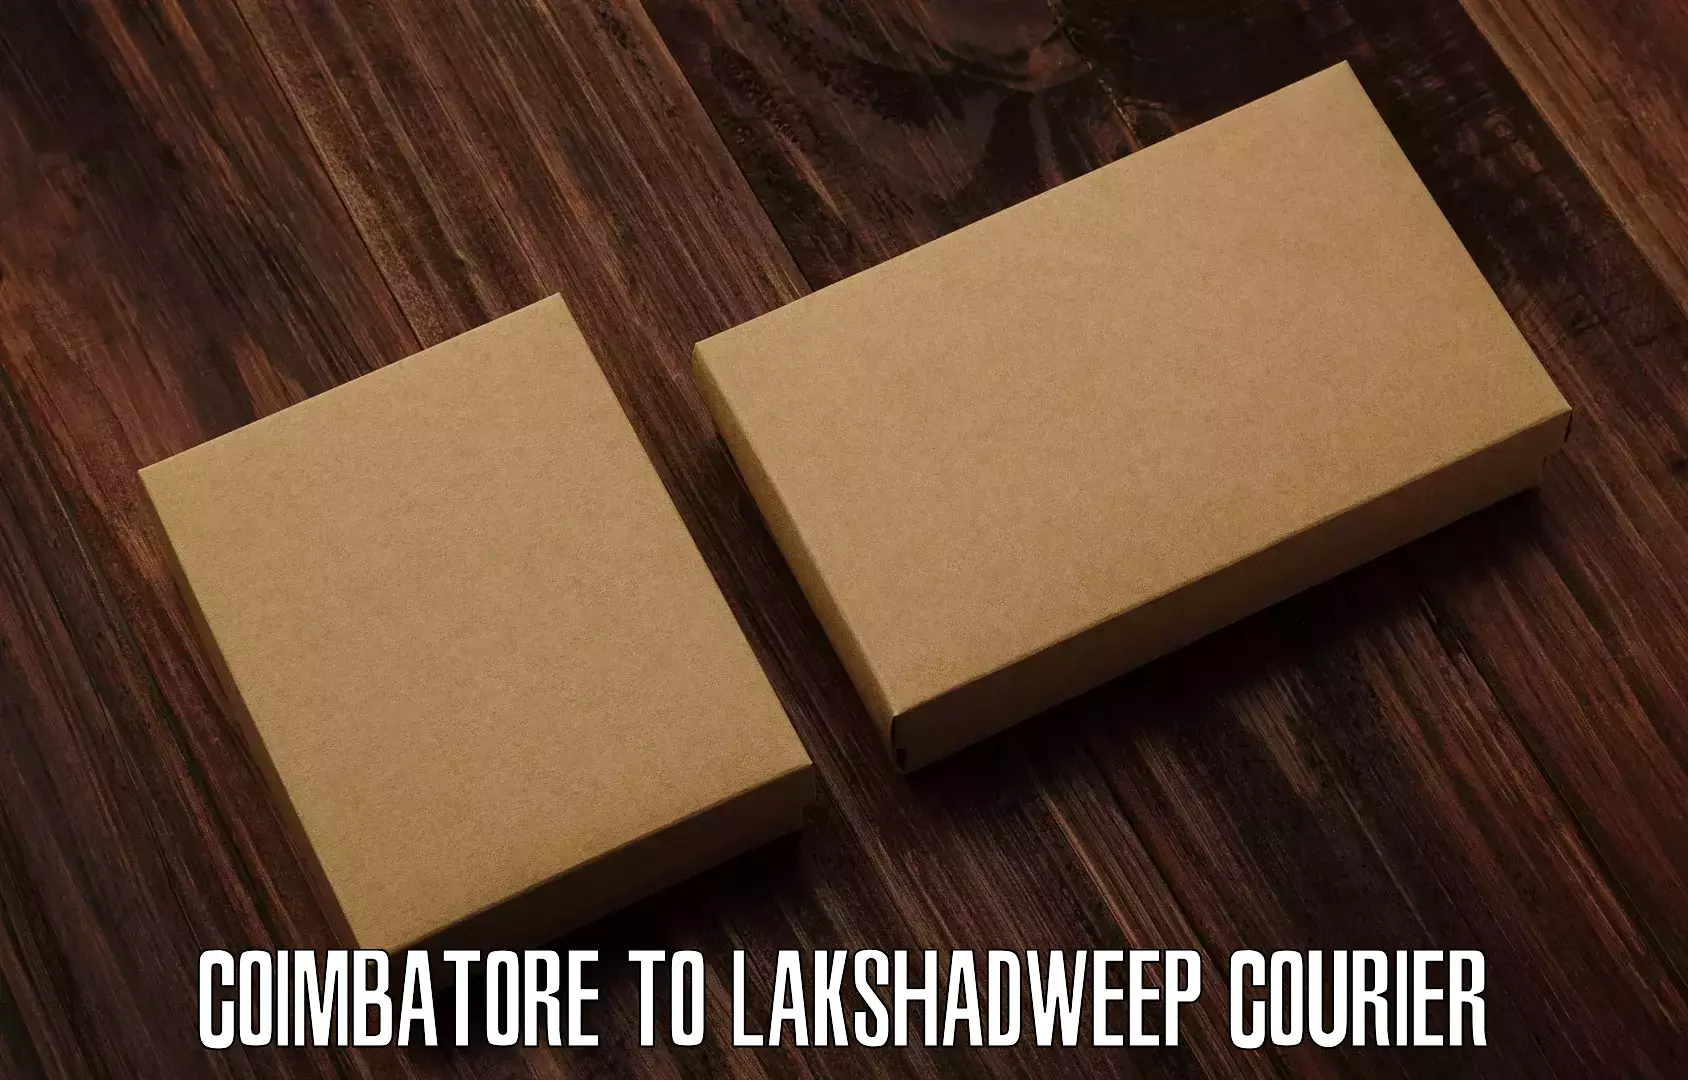 Next-day delivery options Coimbatore to Lakshadweep